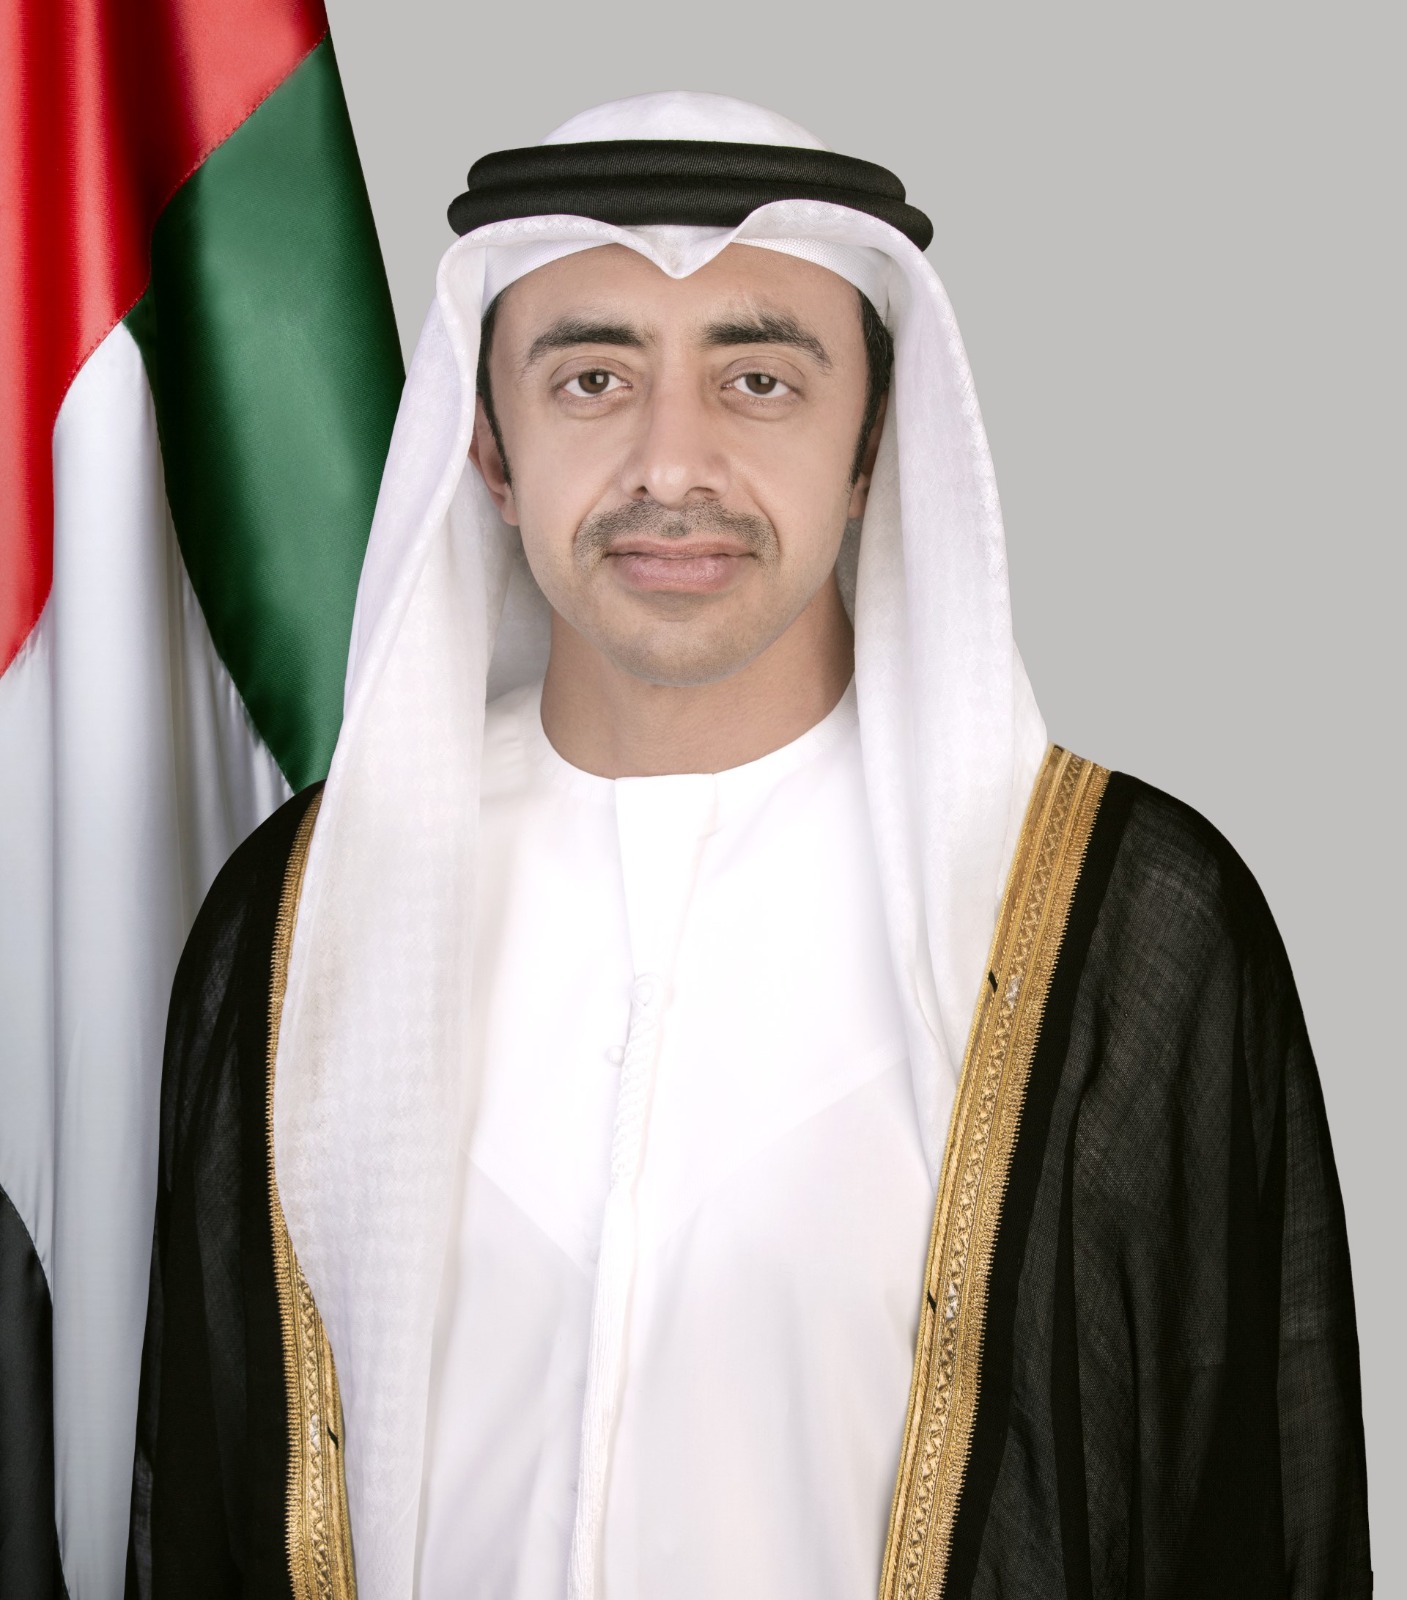 H.H. Sheikh Abdullah bin Zayed Al Nahyan  Cabinet Member, Minister of Foreign Affairs  United Arab Emirates